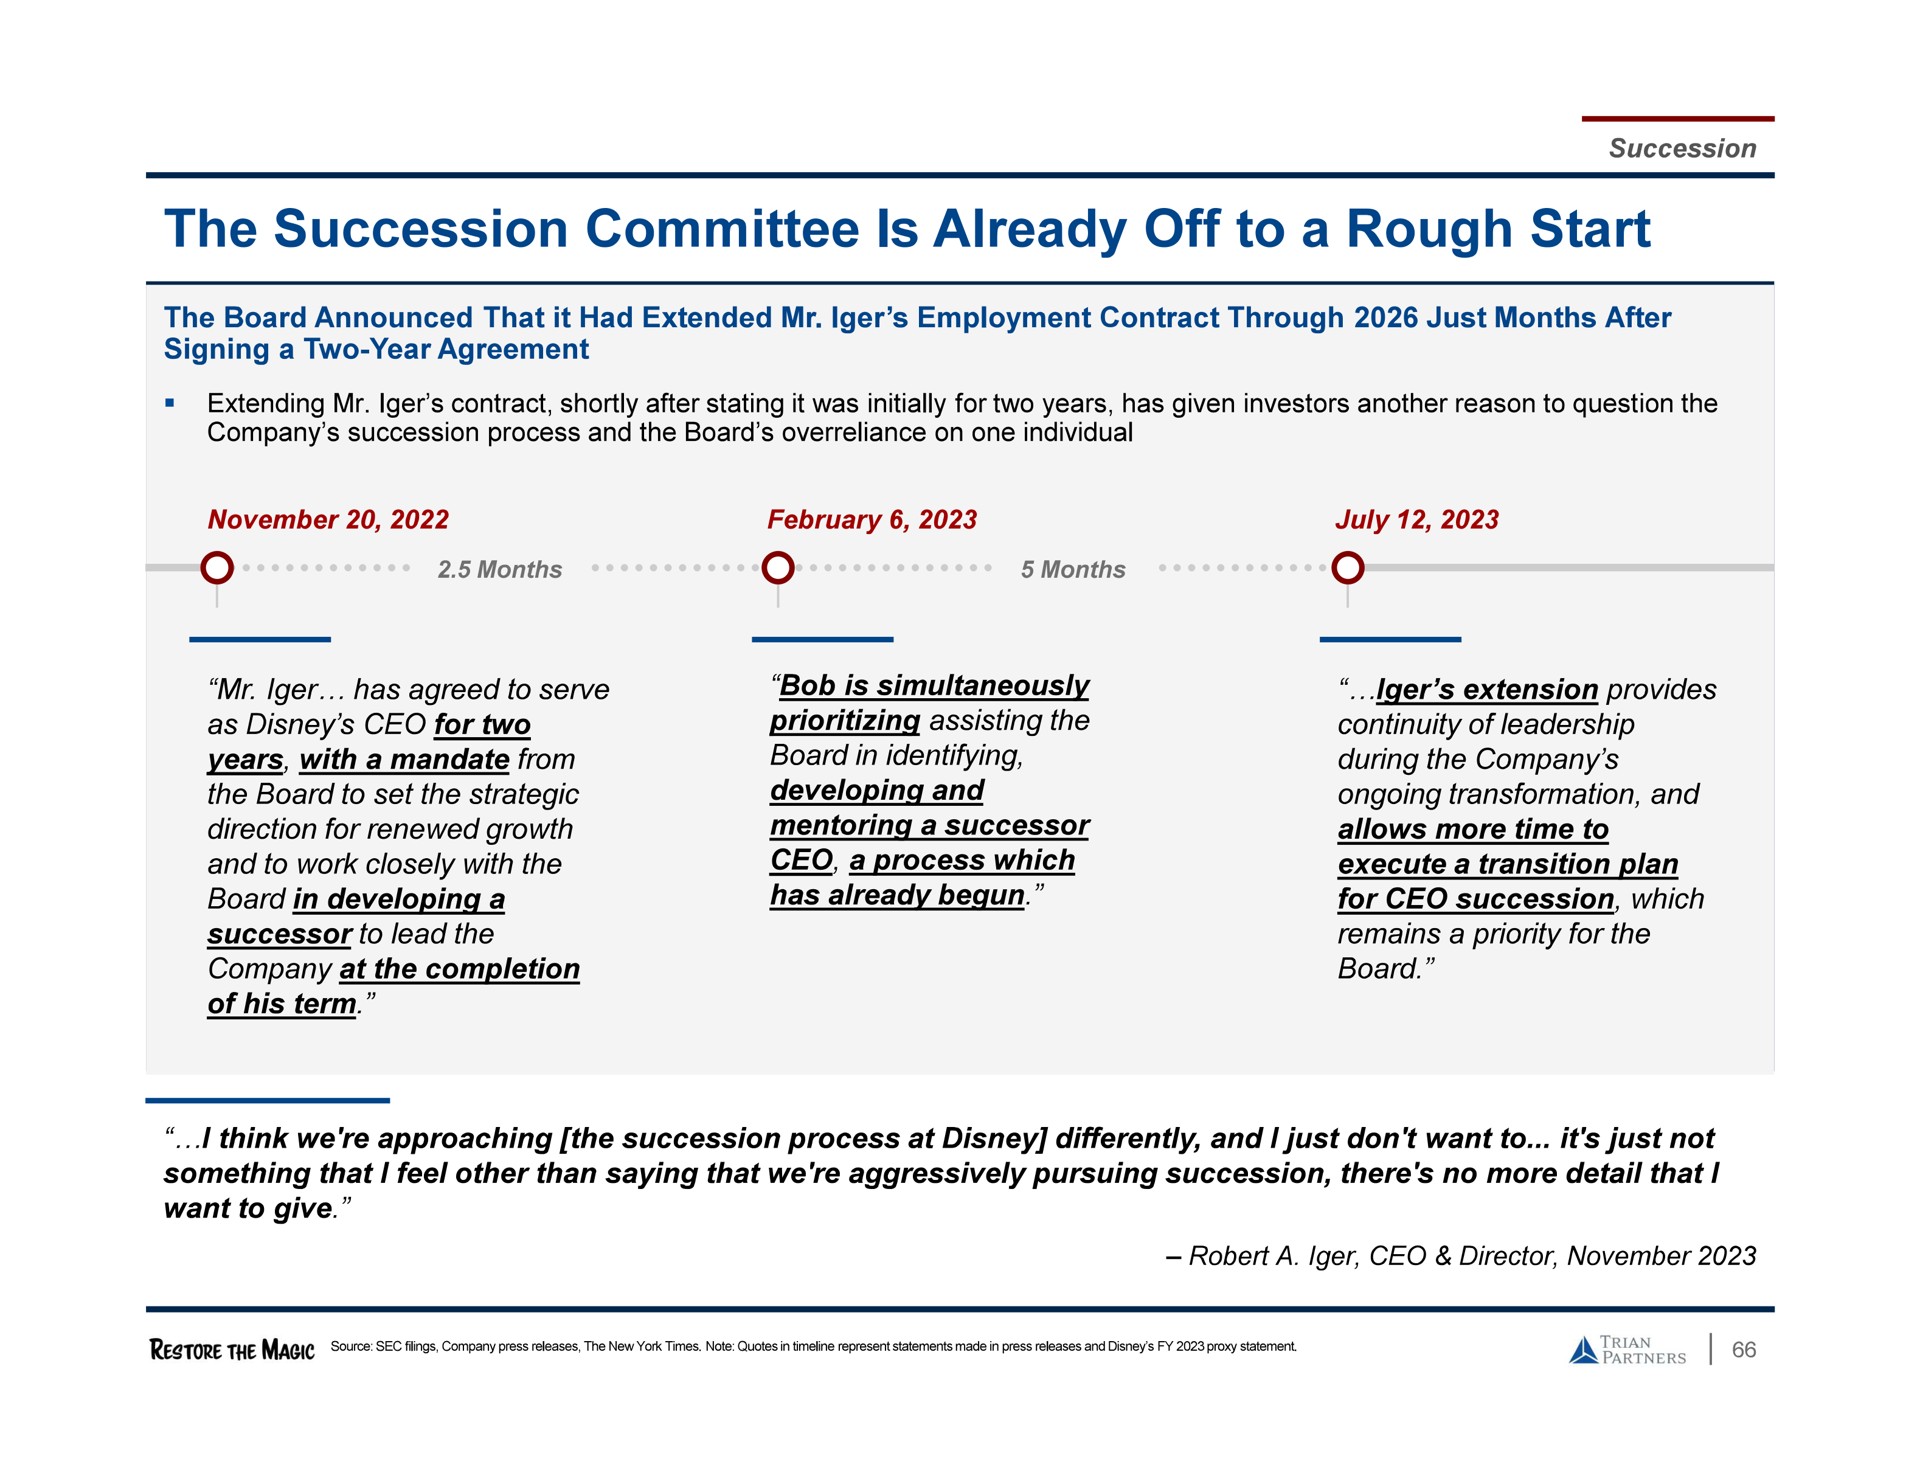 the succession committee is already off to a rough start | Trian Partners